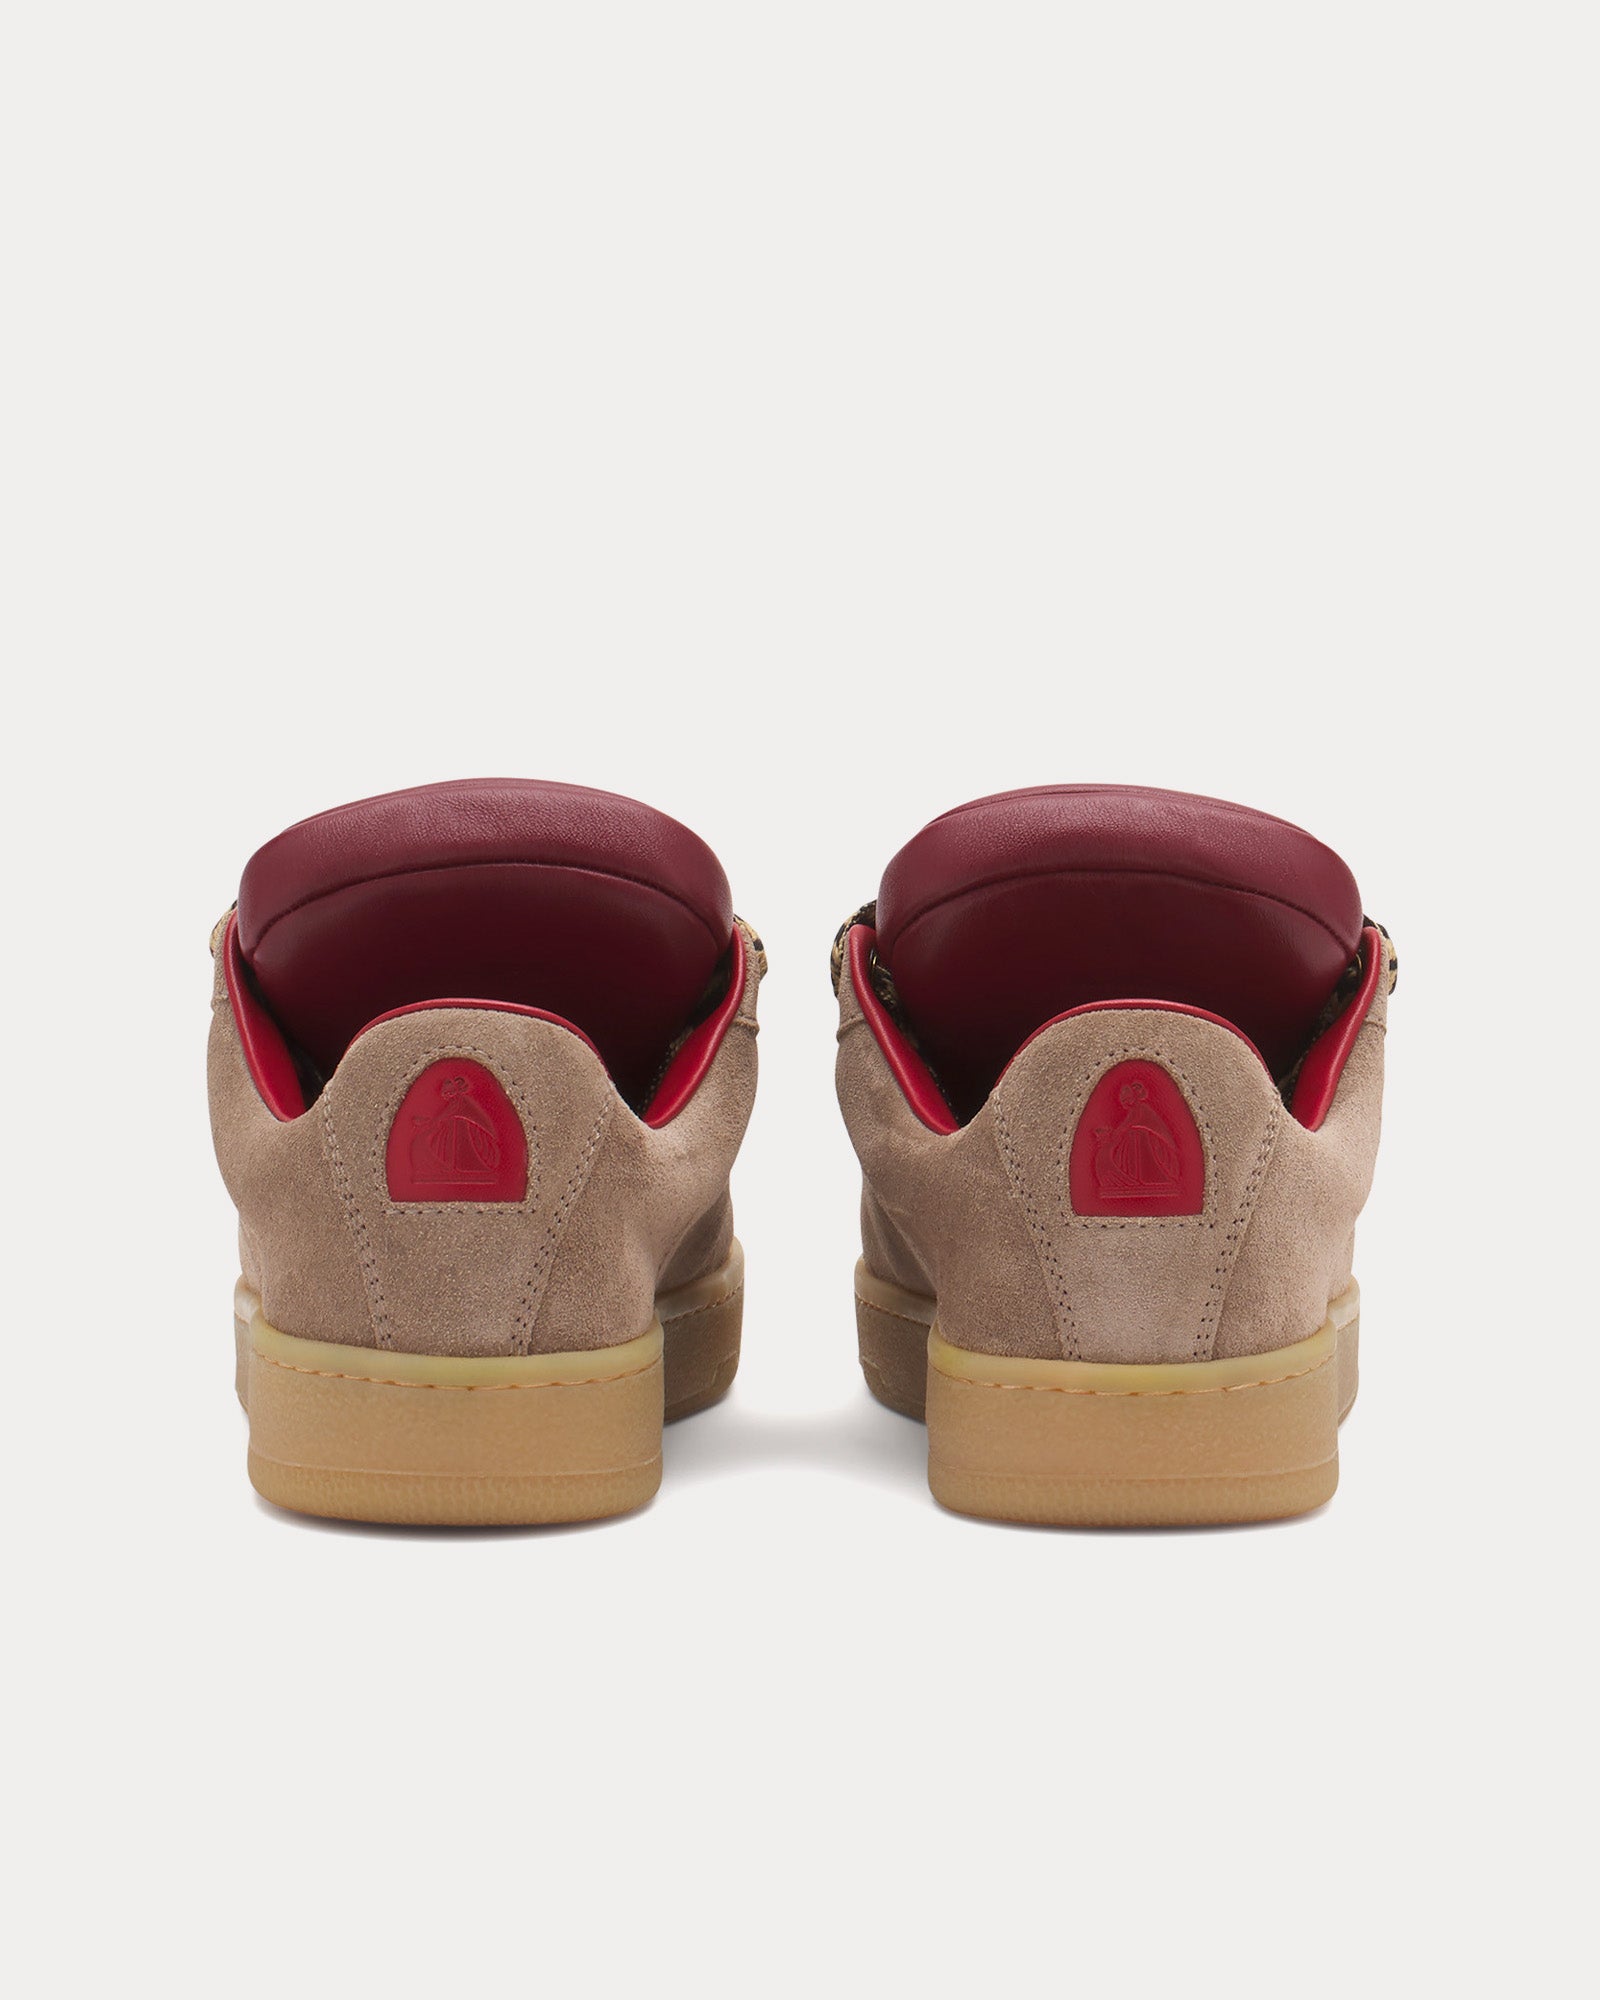 Lanvin x Future - Hyper Curb Lite Leather & Suede Taupe / Red Low Top Sneakers